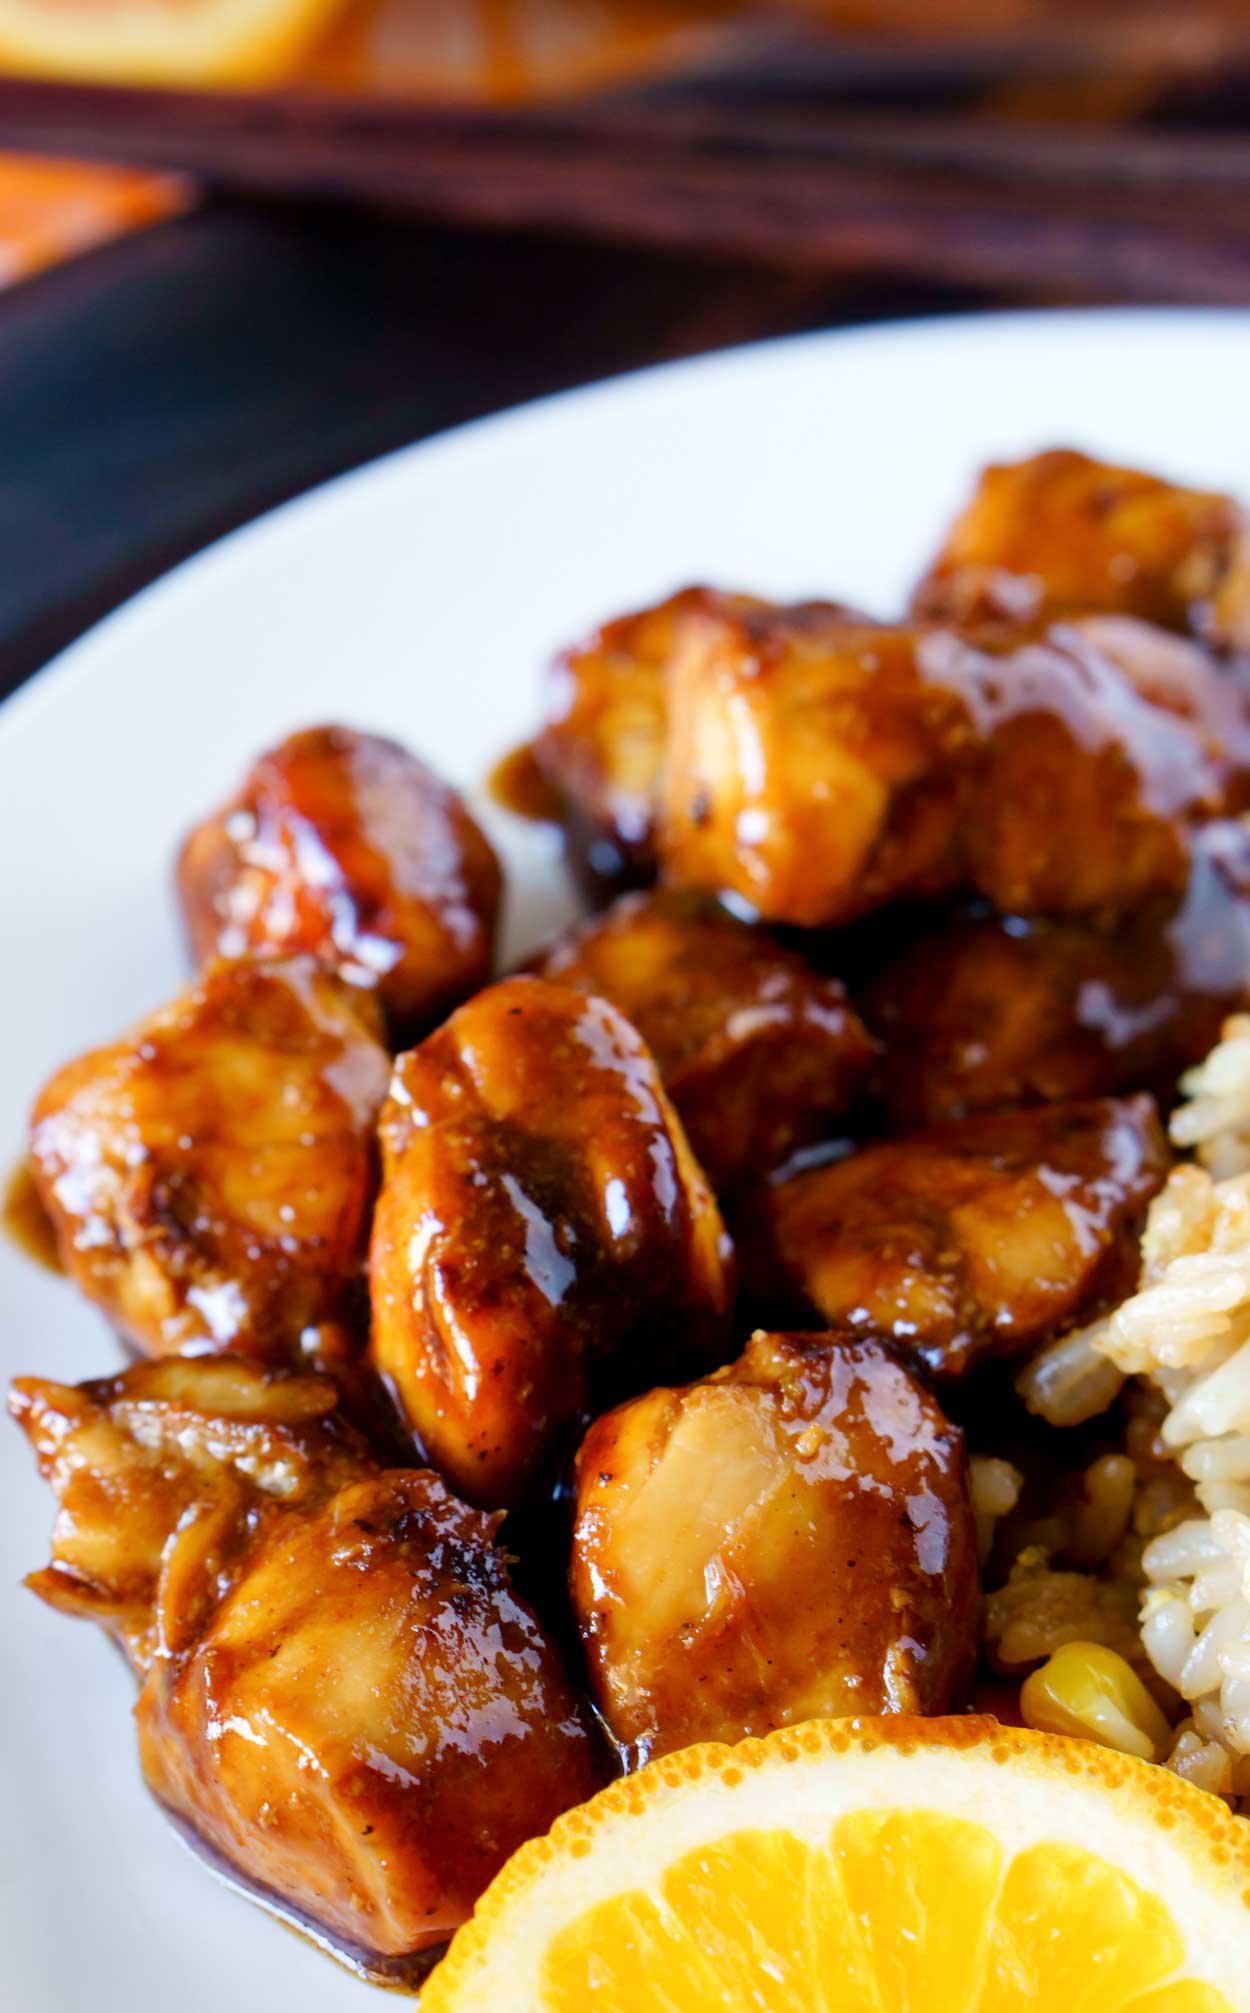 How to make the class Orange Chicken in a healthier way.